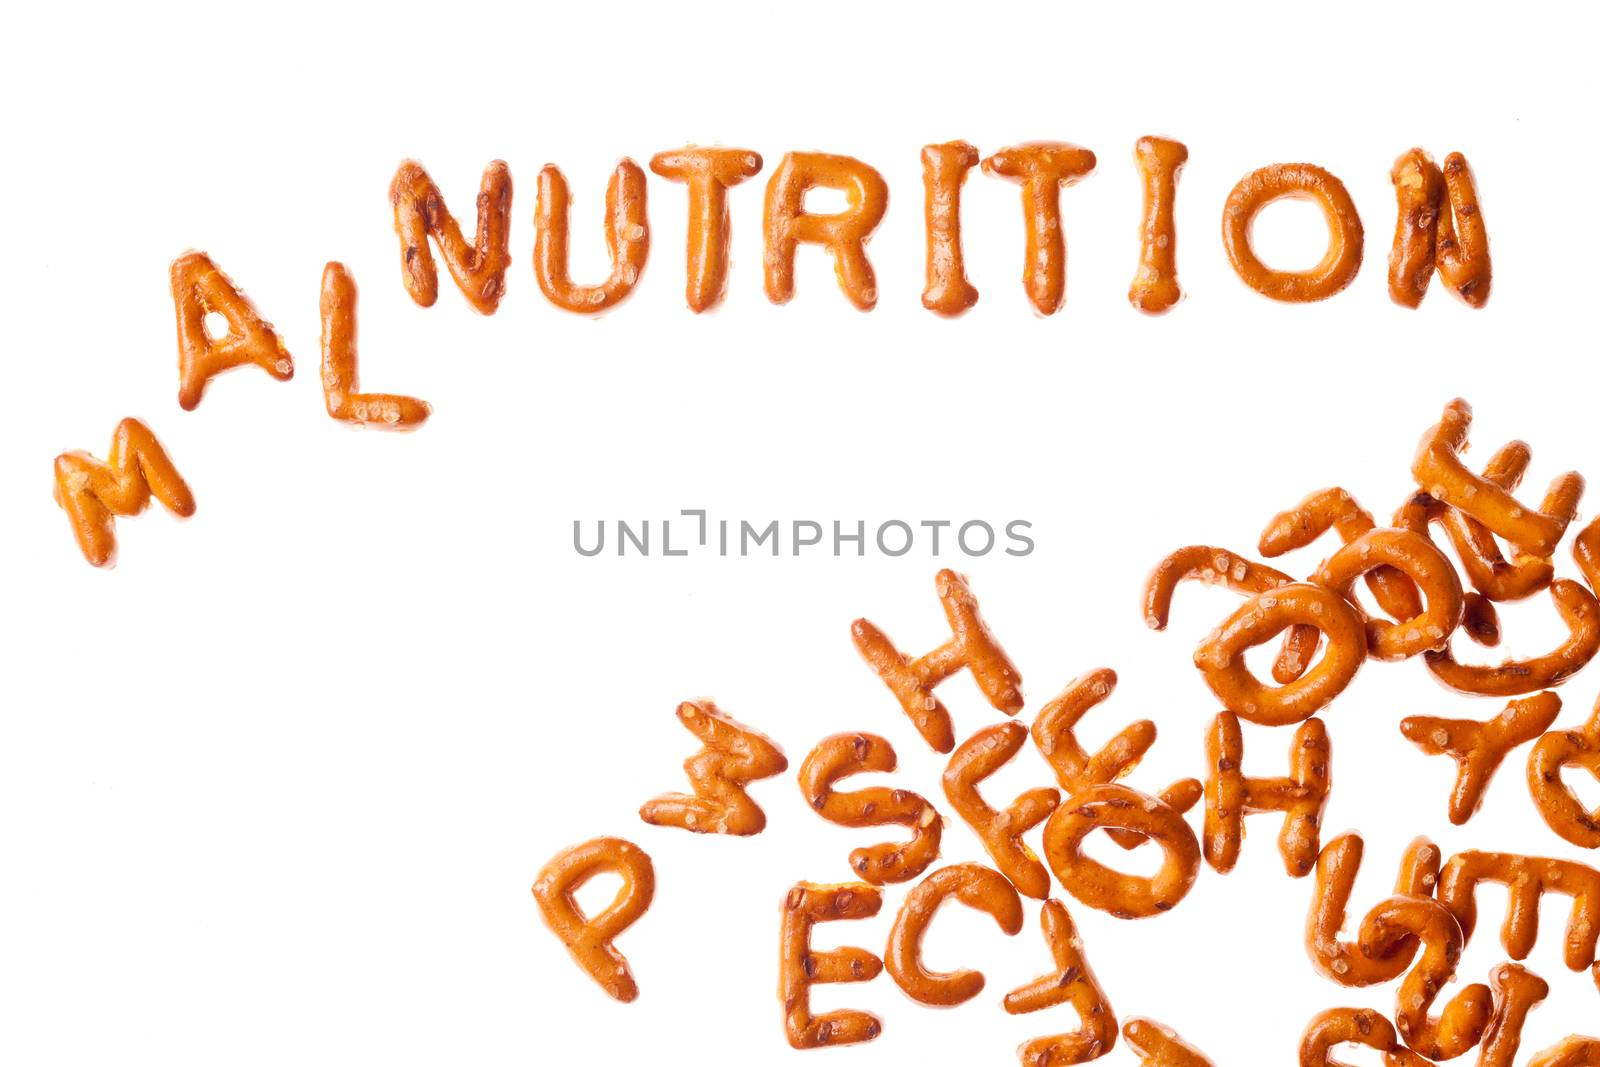 Word NUTRITION written, laid-out, with crispy alphabet pretzels and a group of them isolated on white background